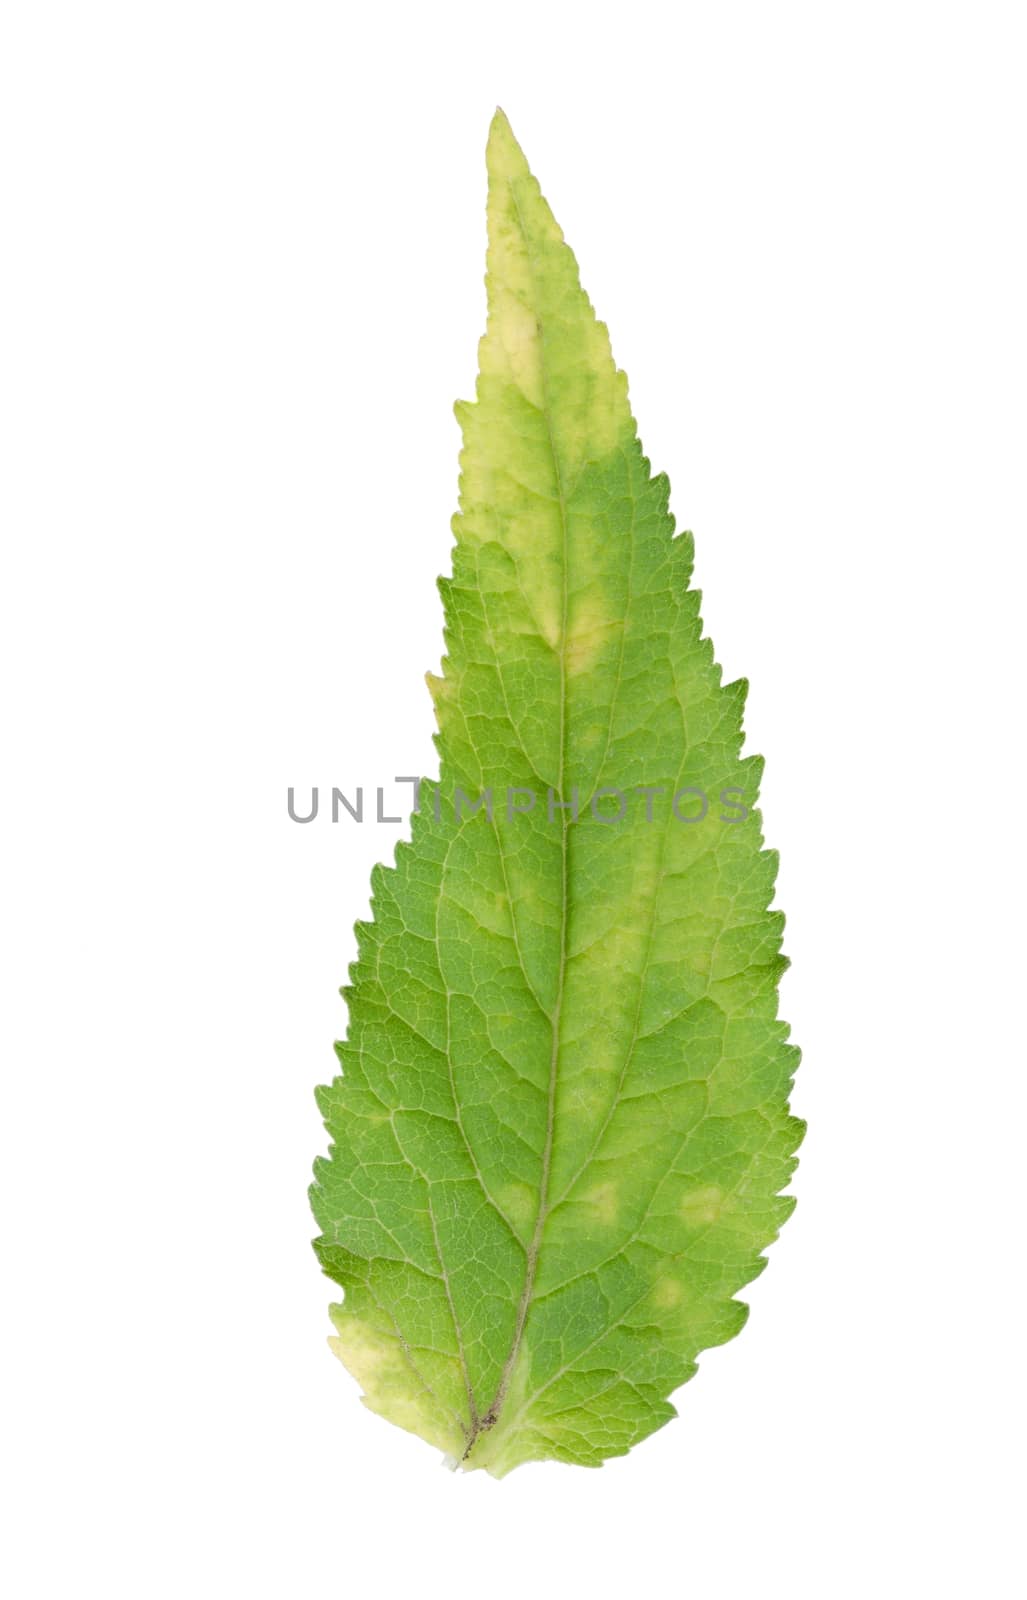 Detail of Campanula rapunculoides leaf isolated on white background.